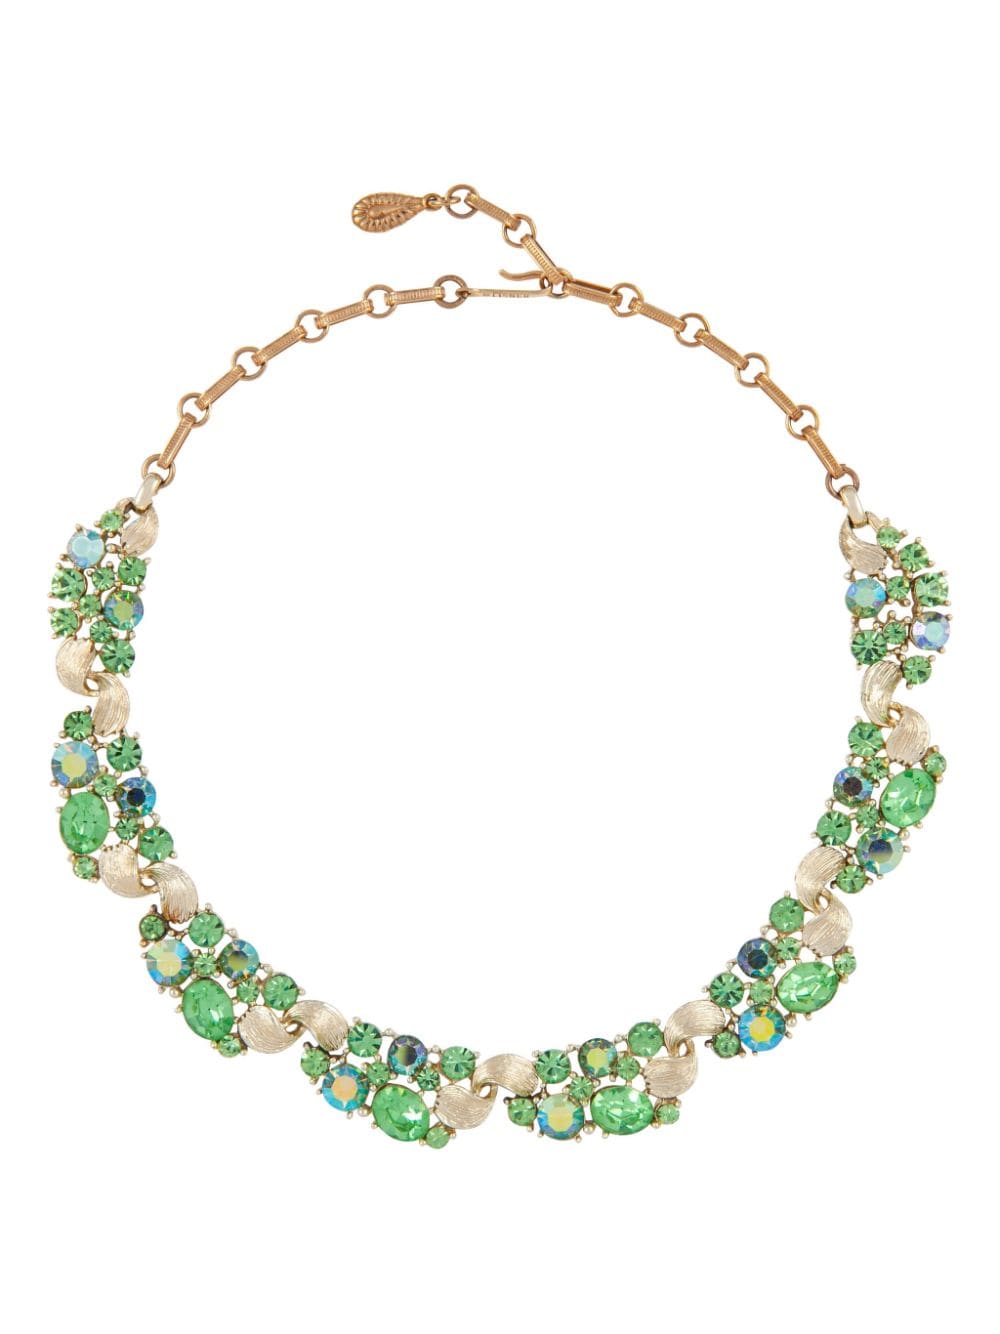 Pre-owned Susan Caplan Vintage 1960s Lisner Peridot And Crystal Embellished Necklace In Gold